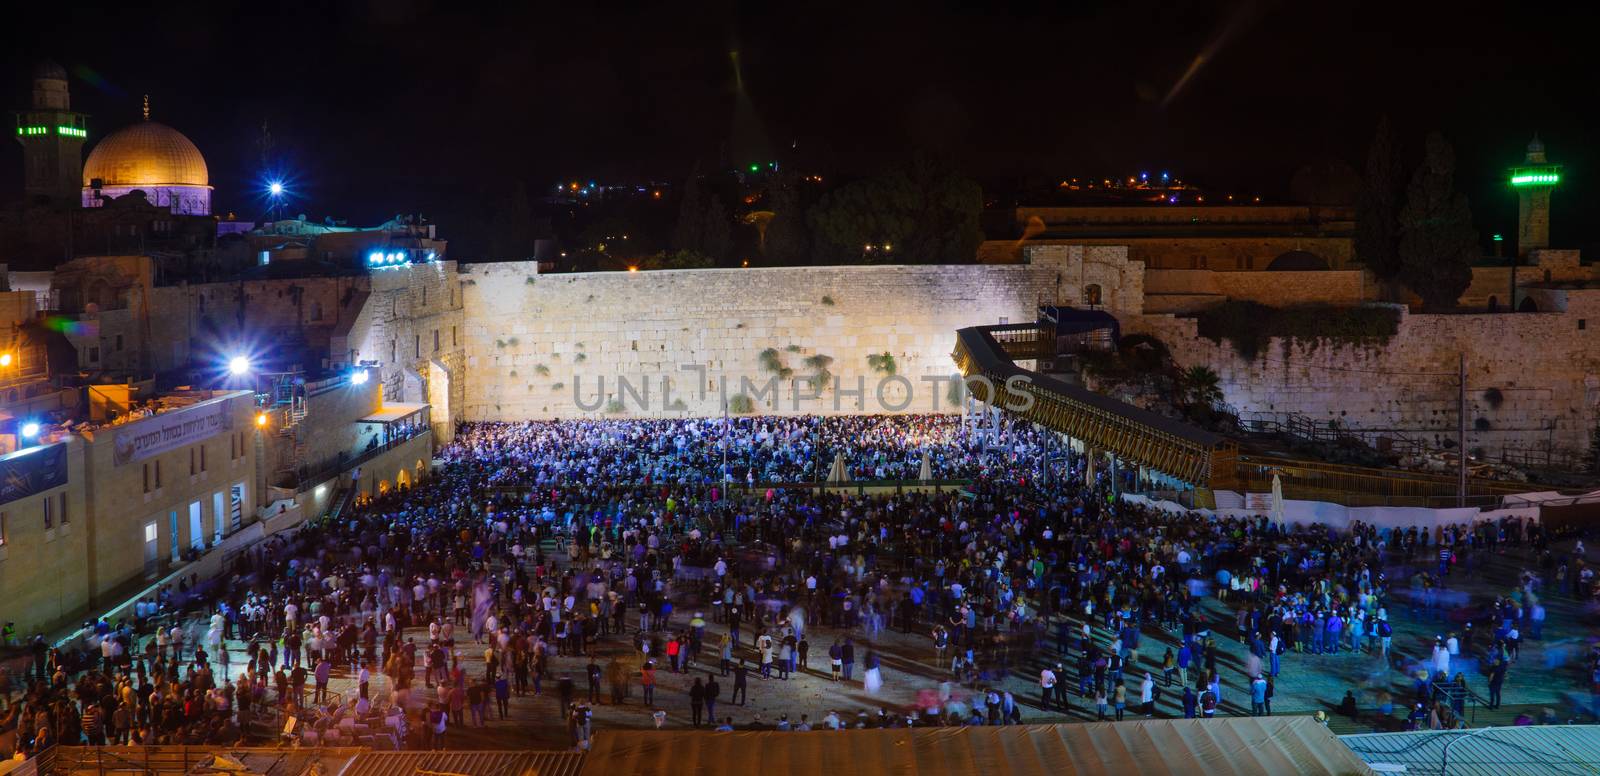 JERUSALEM, ISRAEL - SEPTEMBER 23, 2016: Scene of the western wall with a huge crowd of Selichot (Jewish penitential prays) prayers, in the old city of Jerusalem, Israel. Its an annual Jewish tradition